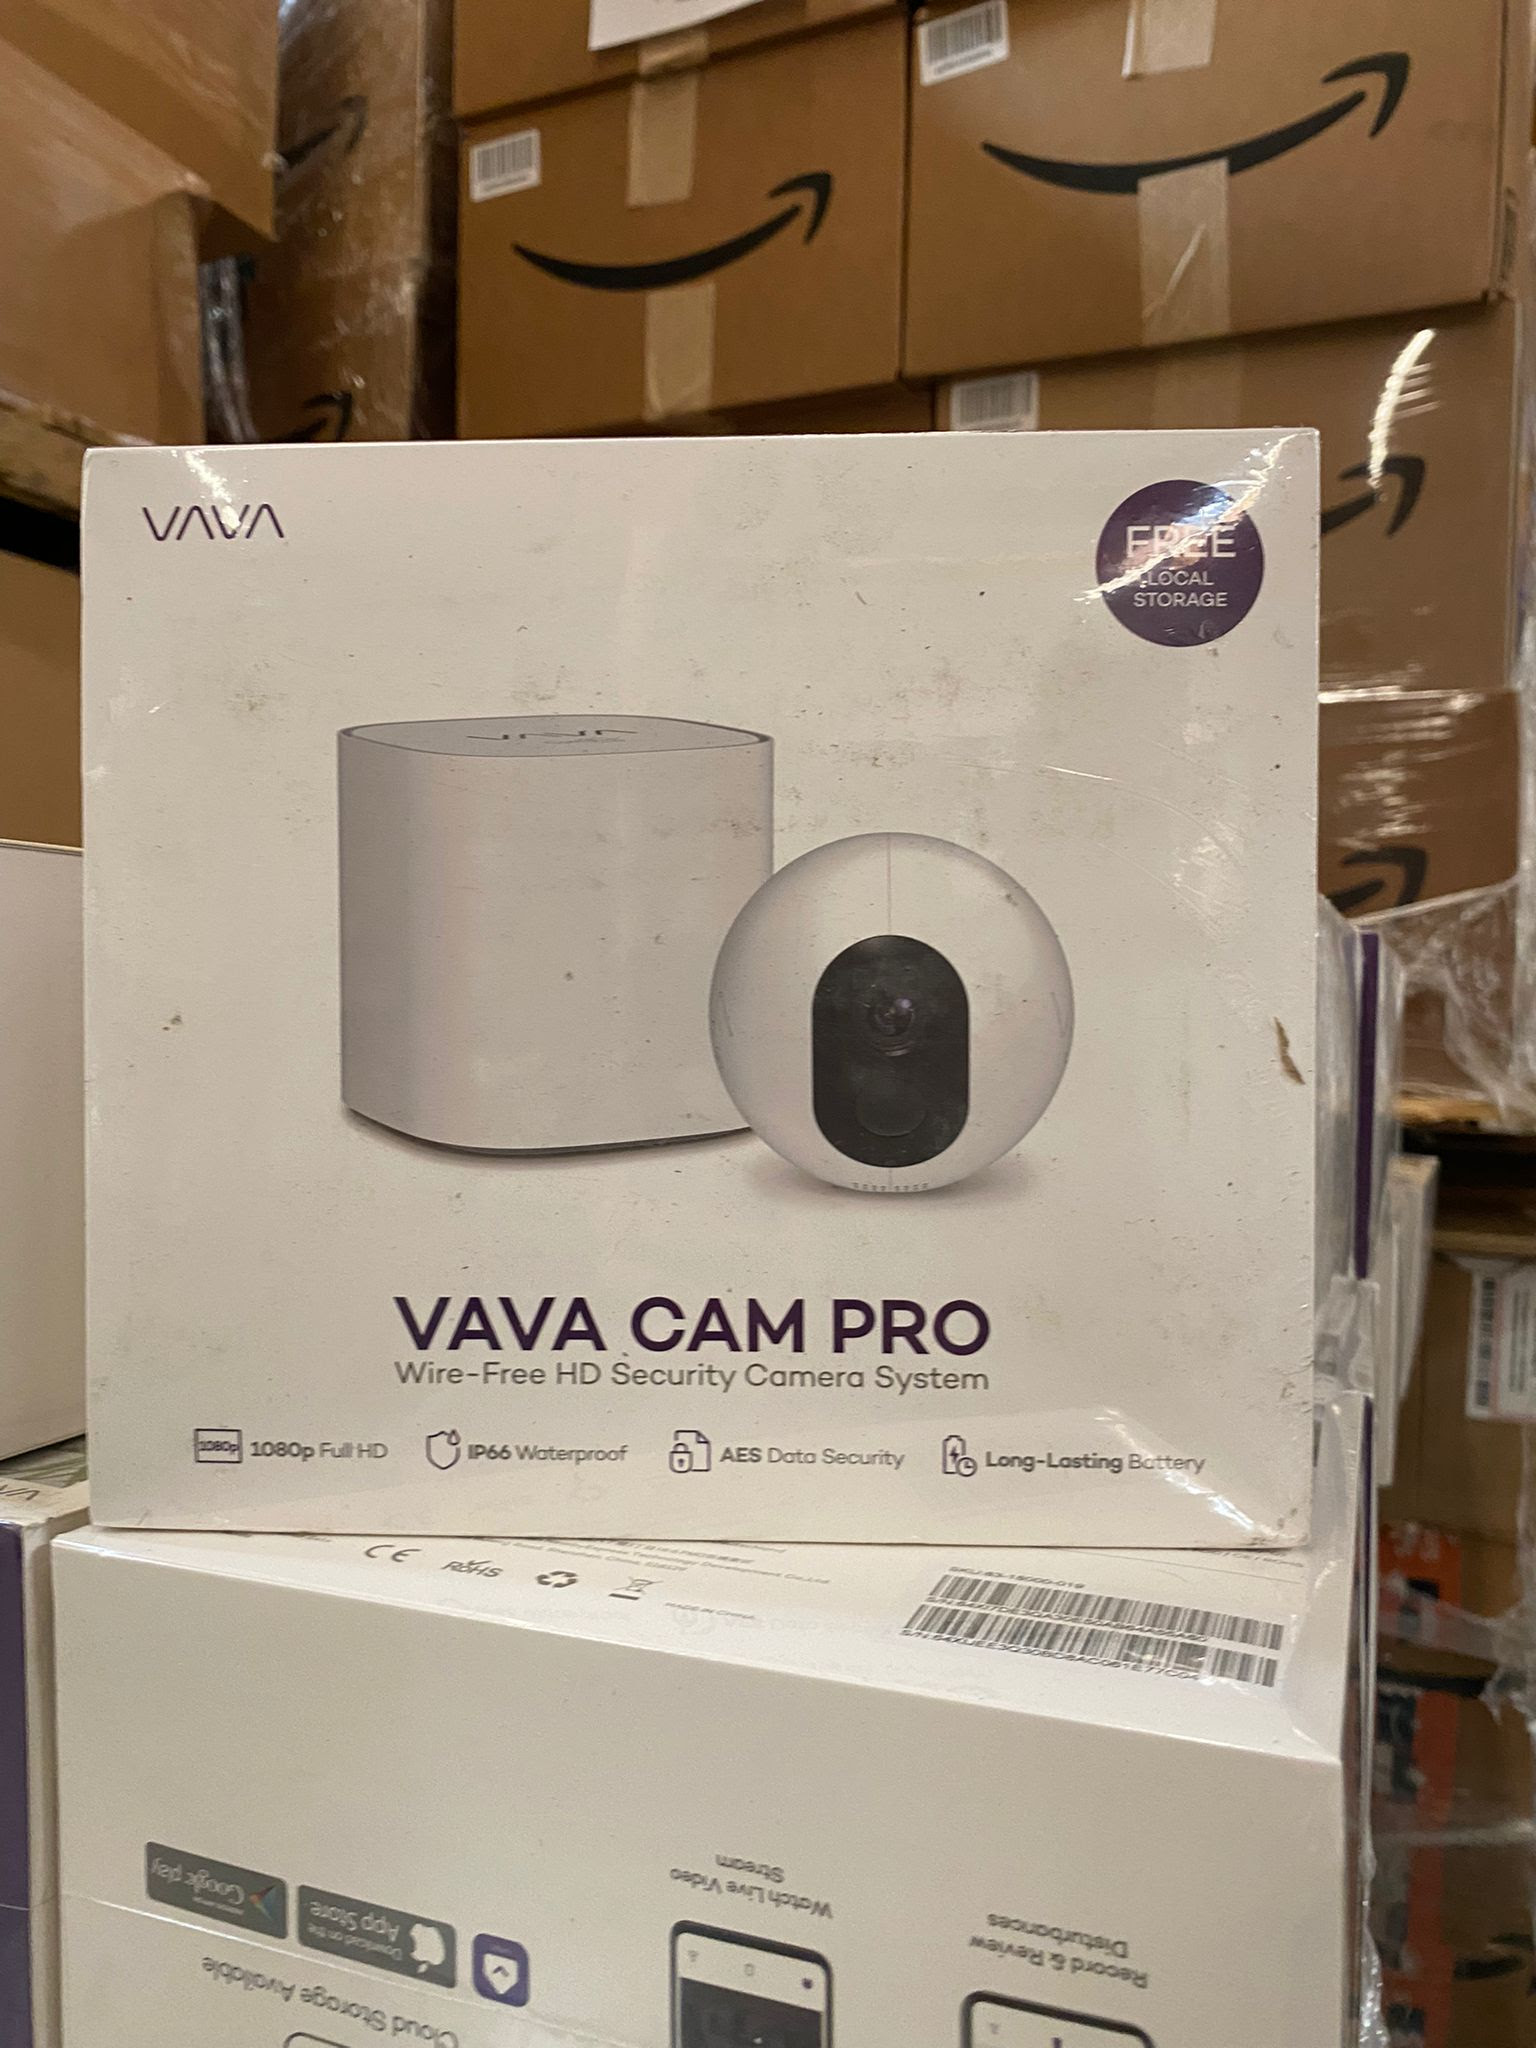 VAVA CAM PRO wire-Free HD Outdoor Security Camera System.